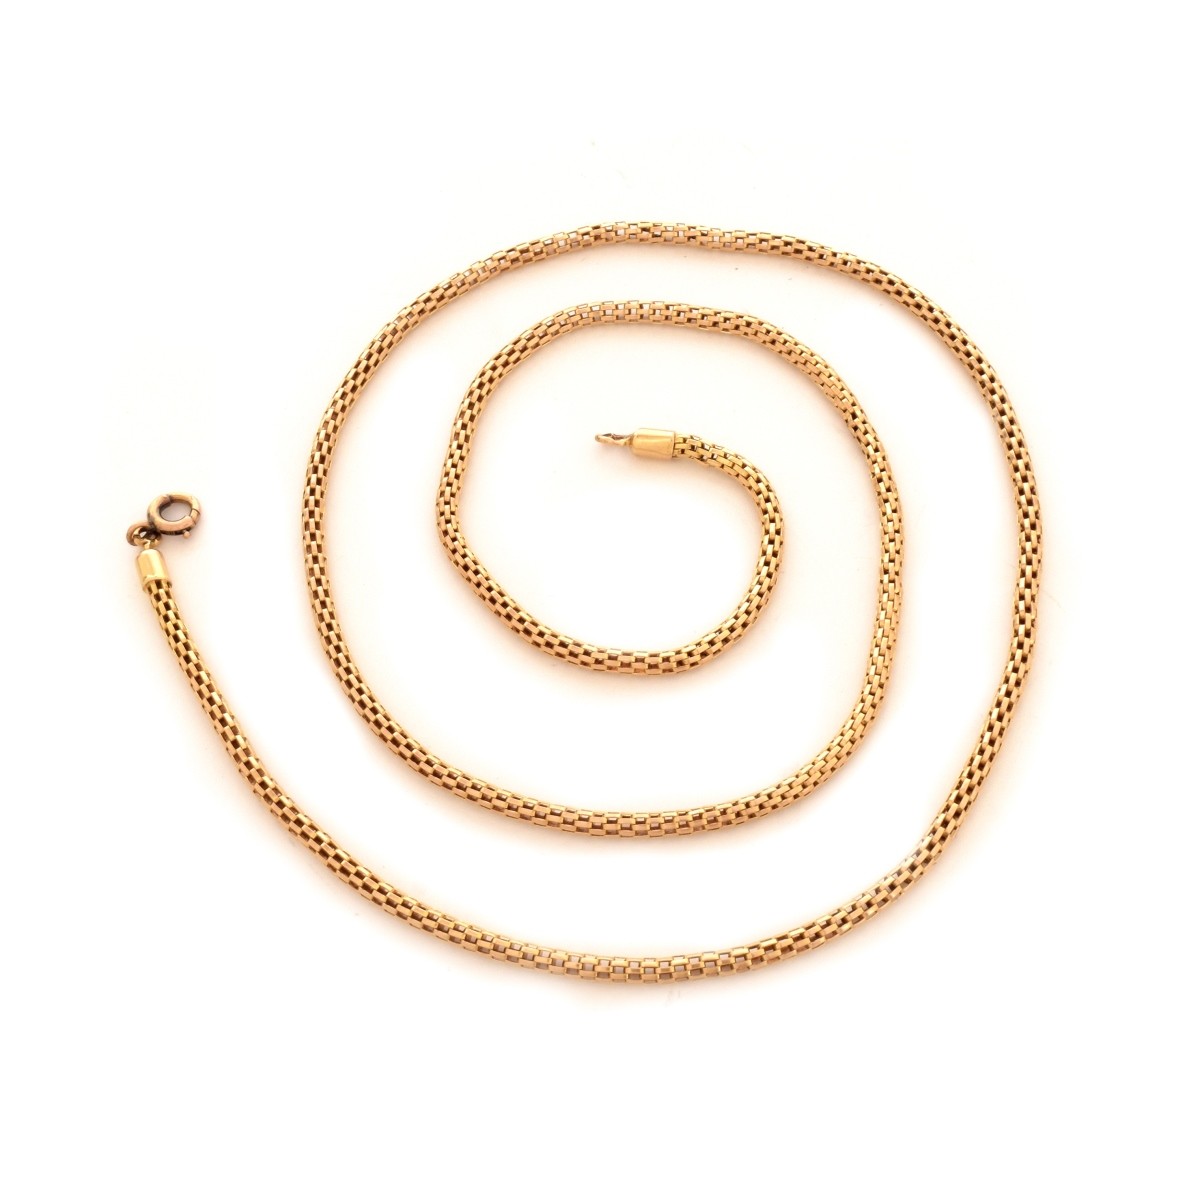 18K Chain / Necklace